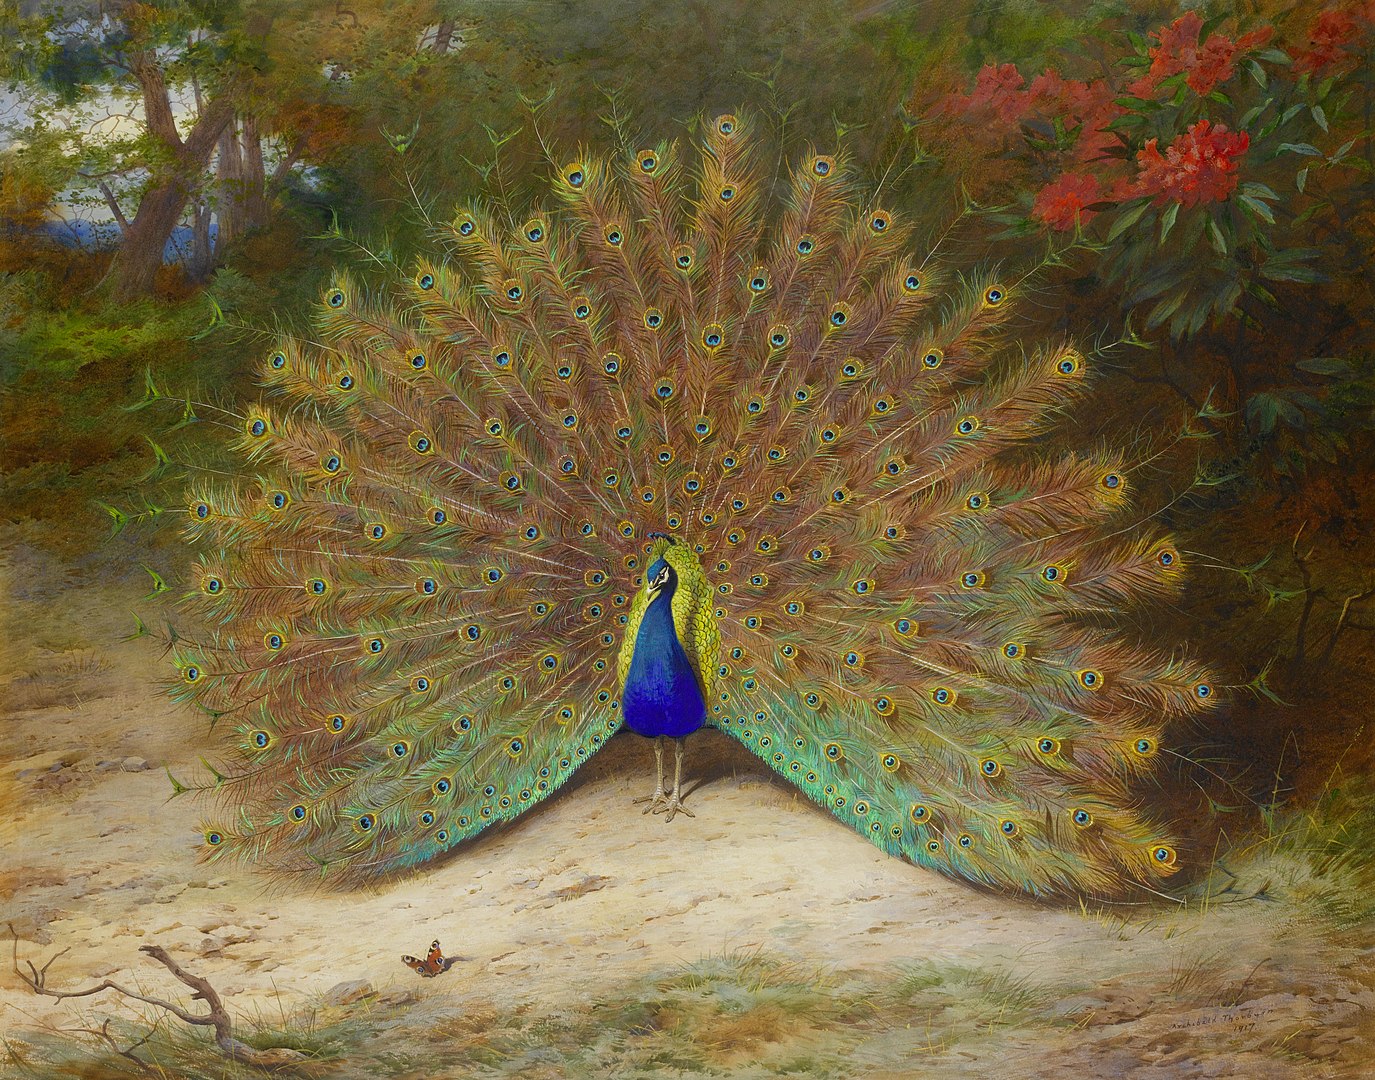 A peacock with its feathers open